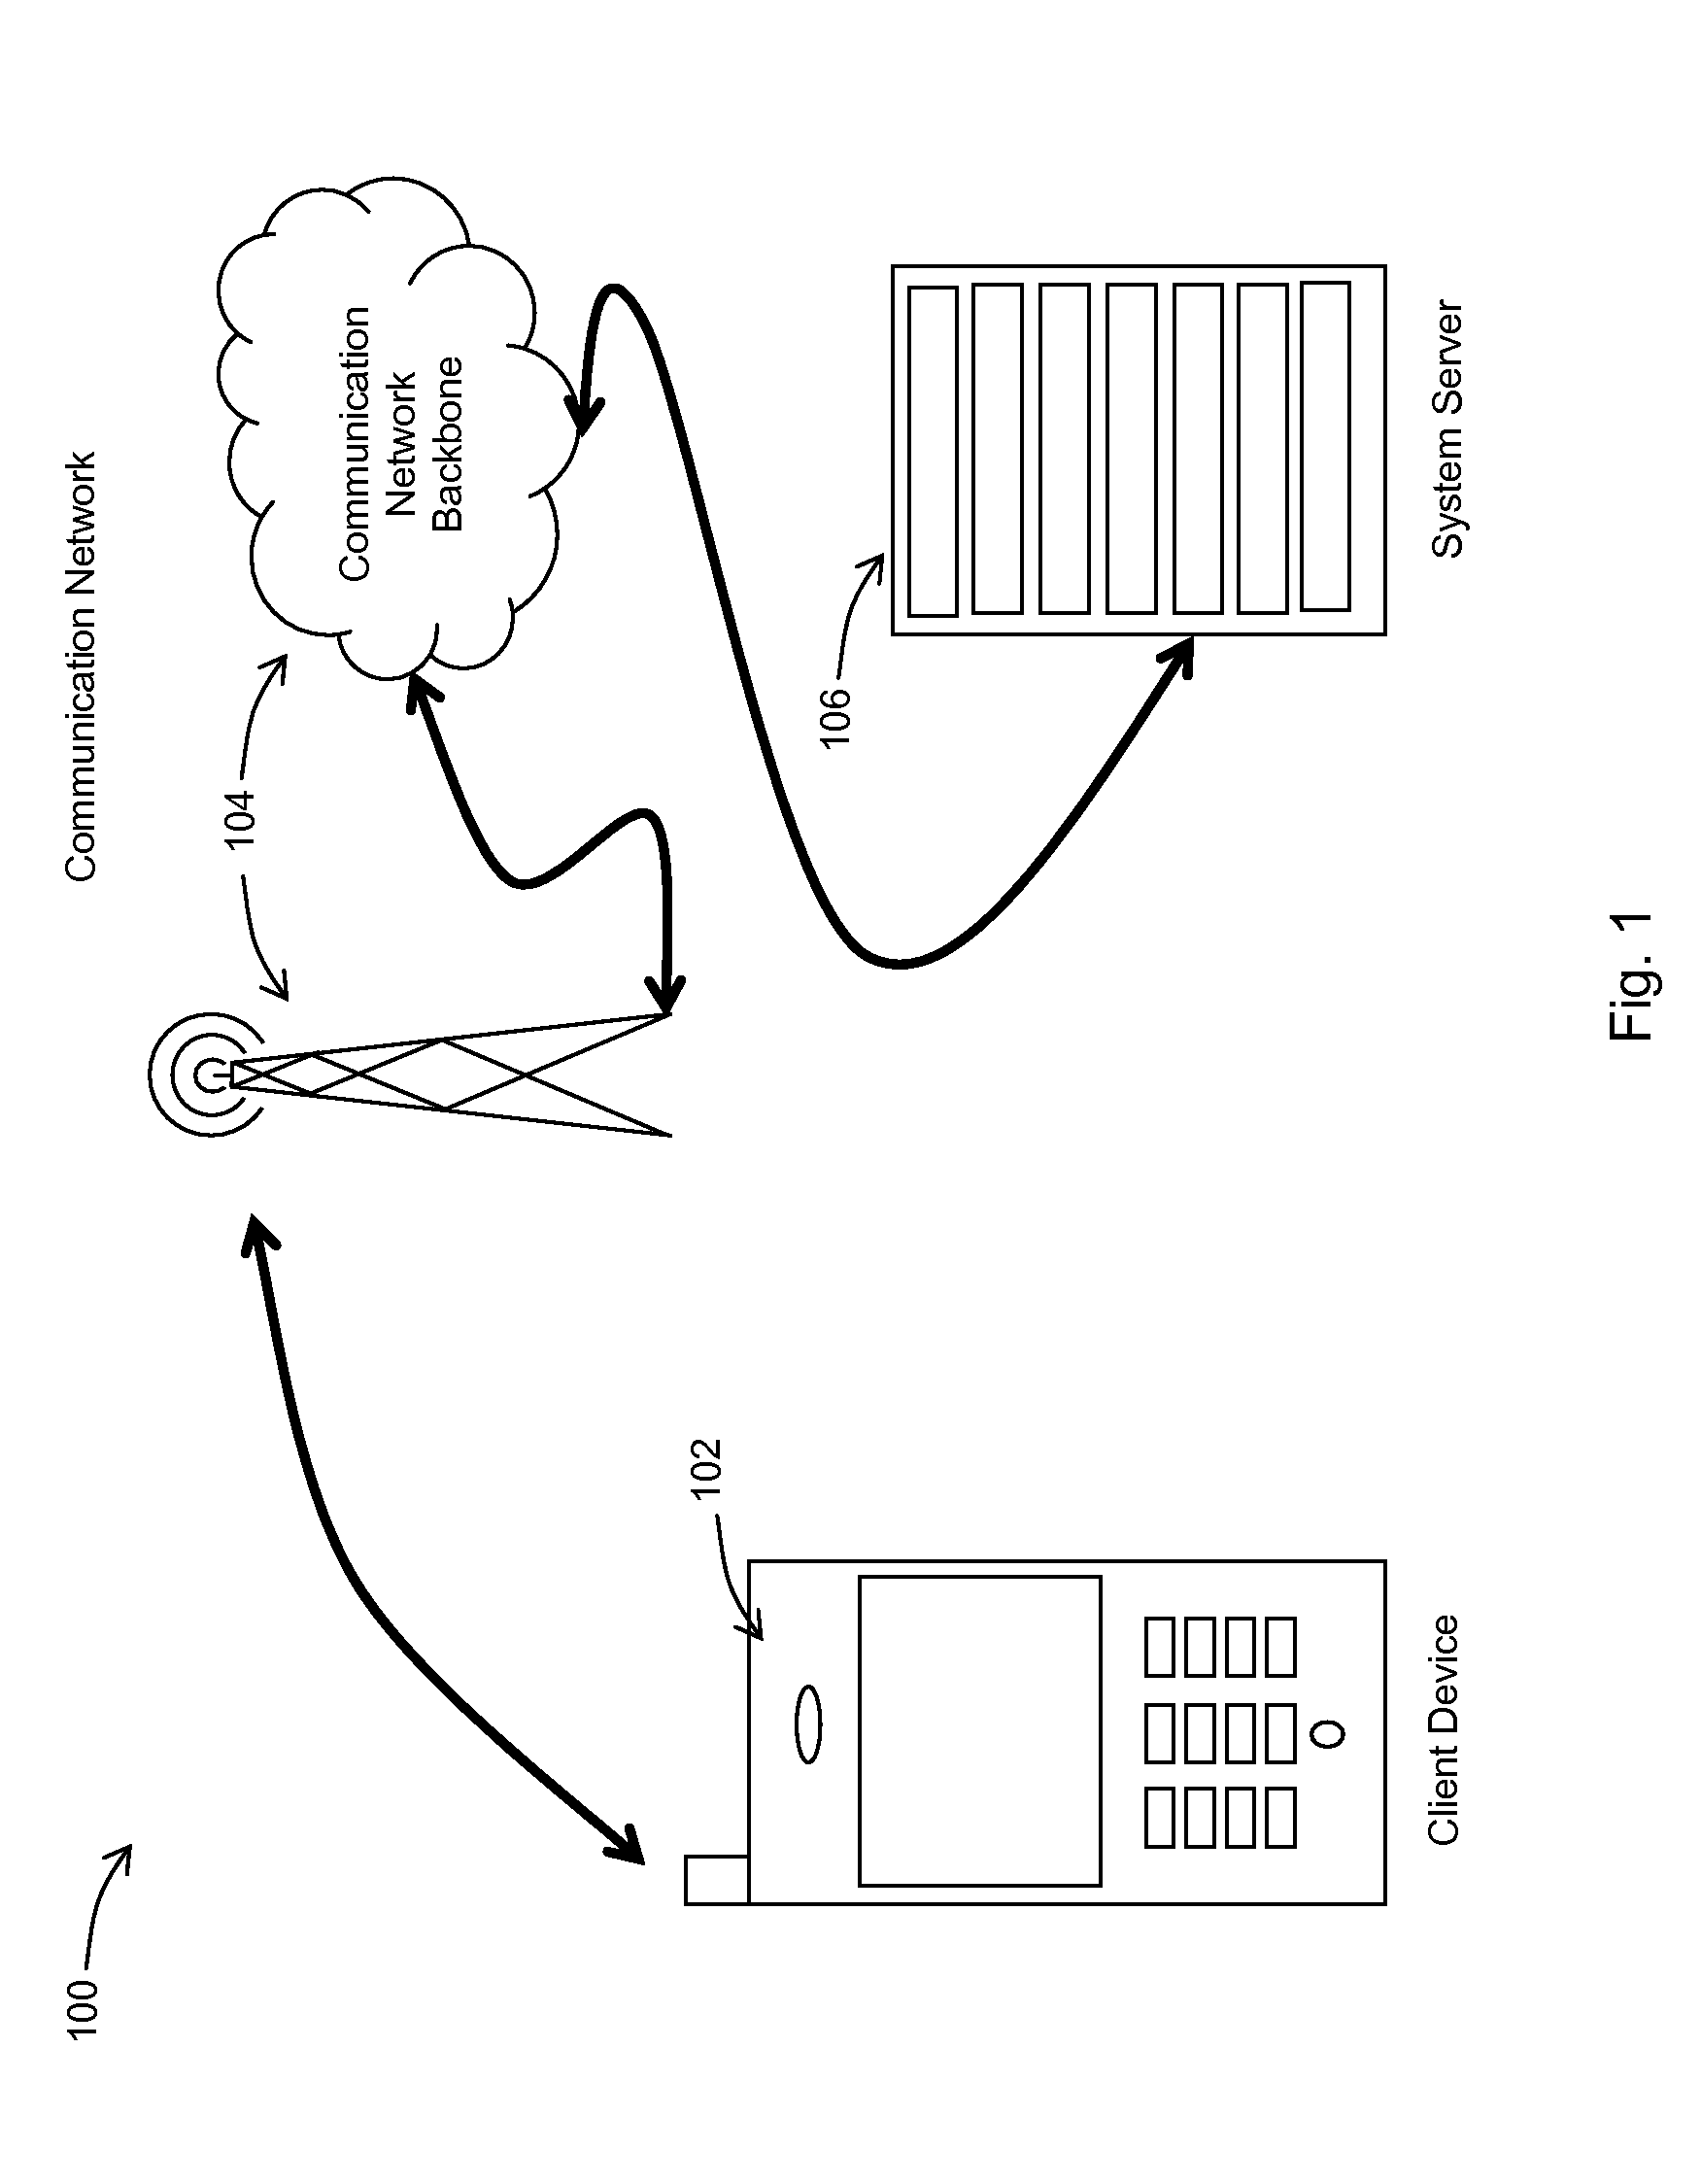 Method and System for Managing Multimedia Documents